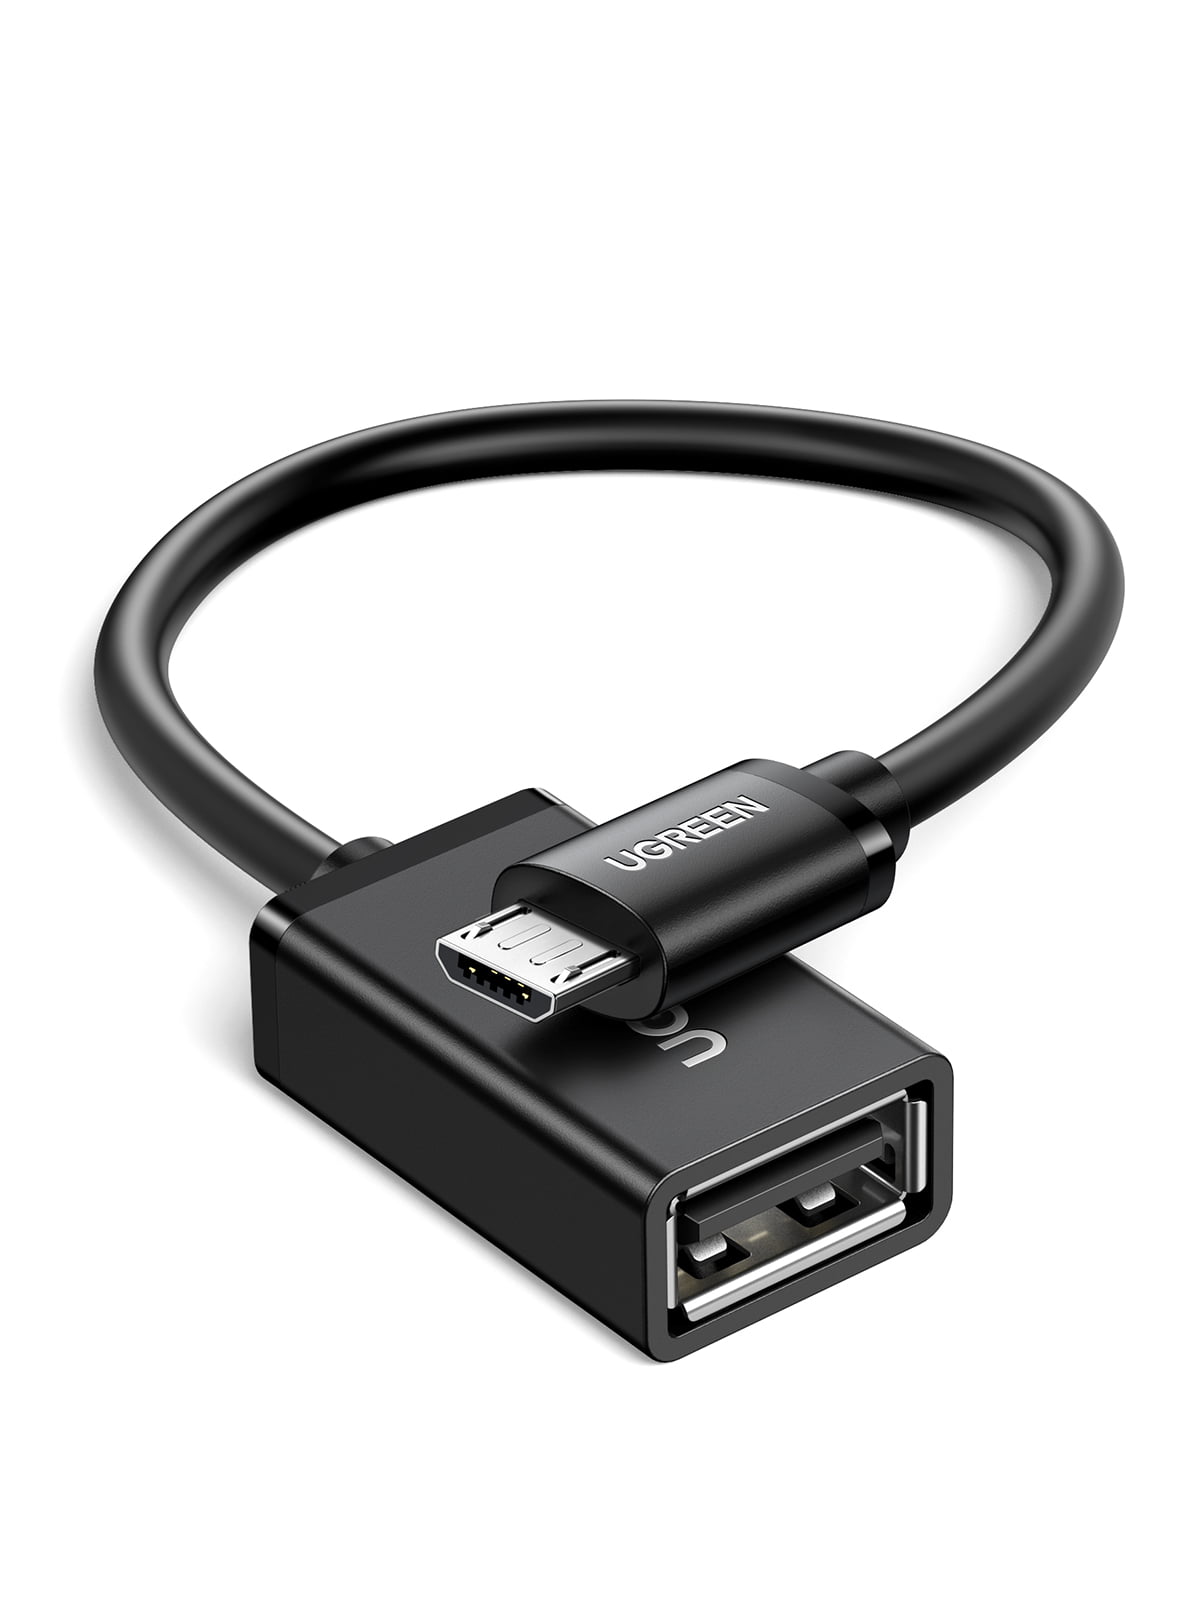 Premium USB OTG Host Adapter Cable Cord For Lenovo Yoga Tablet 2 8-Inch 10-Inch 